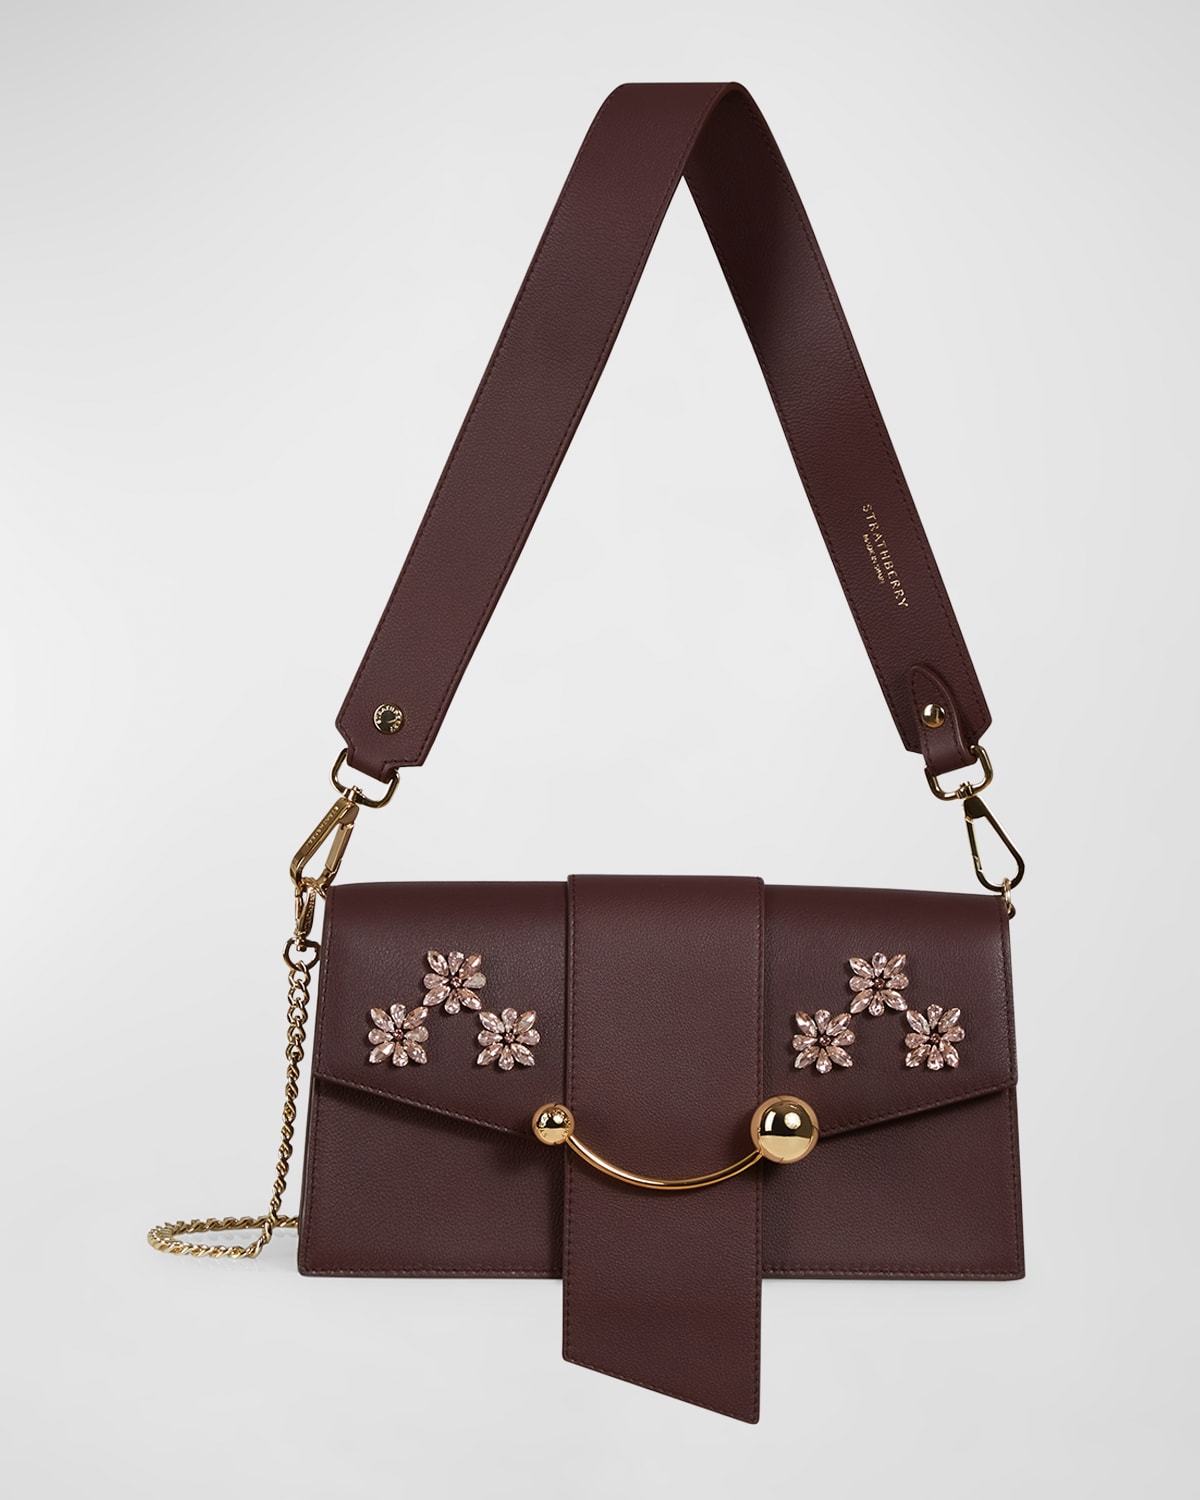 STRATHBERRY CRESCENT MINI FLORAL BEADED CROSSBODY BAG